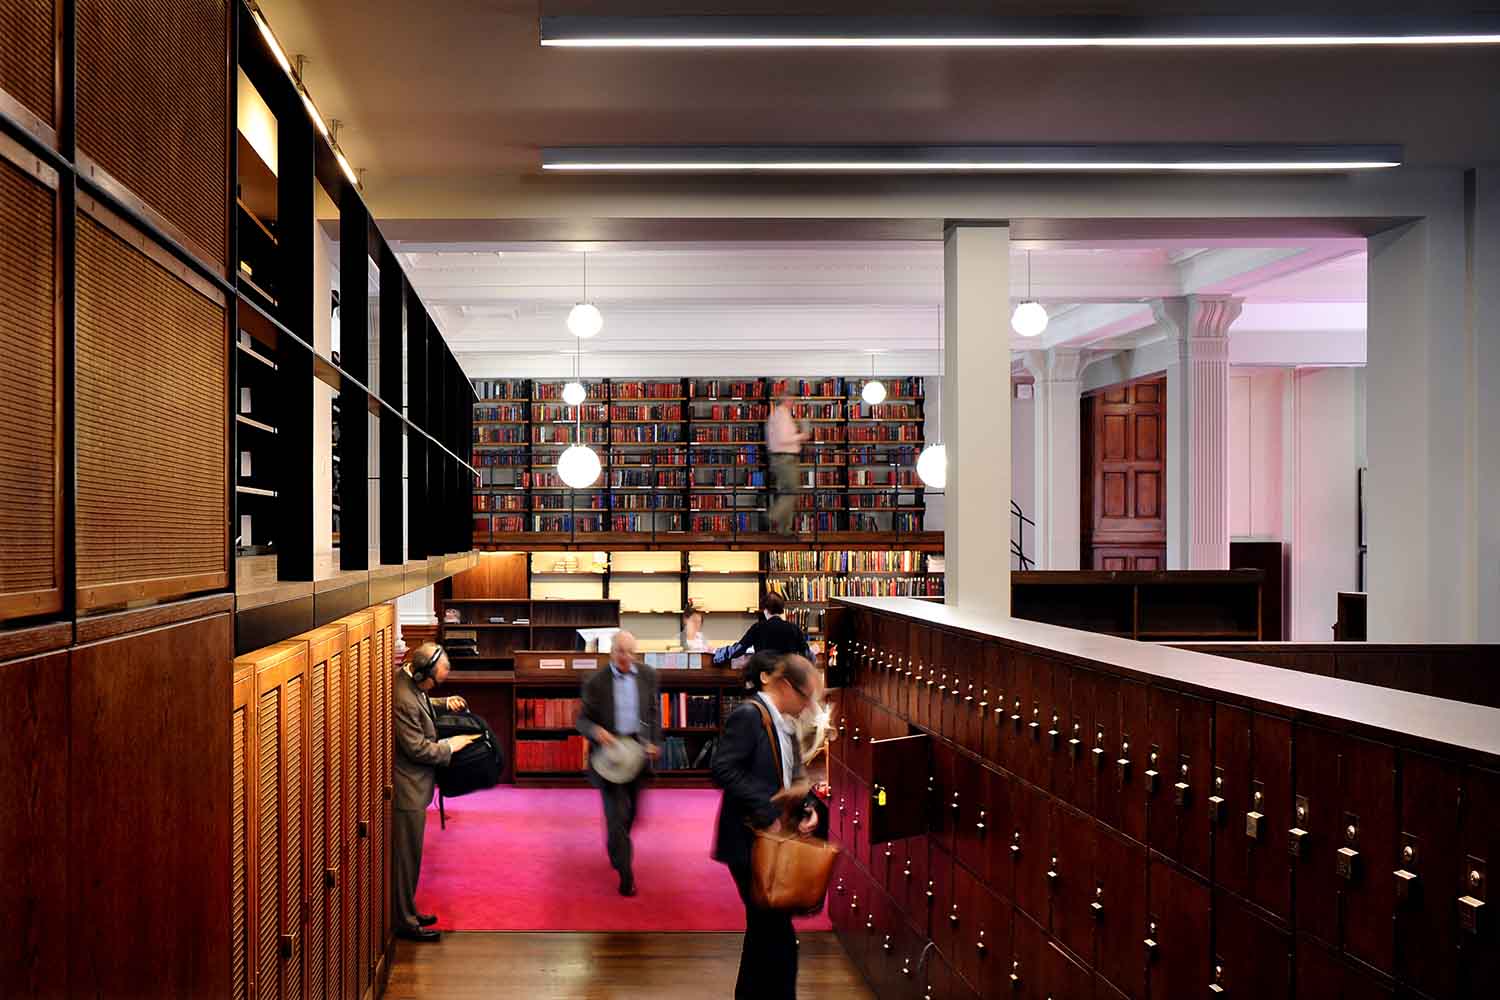 bespoke libary furniture for the London Library